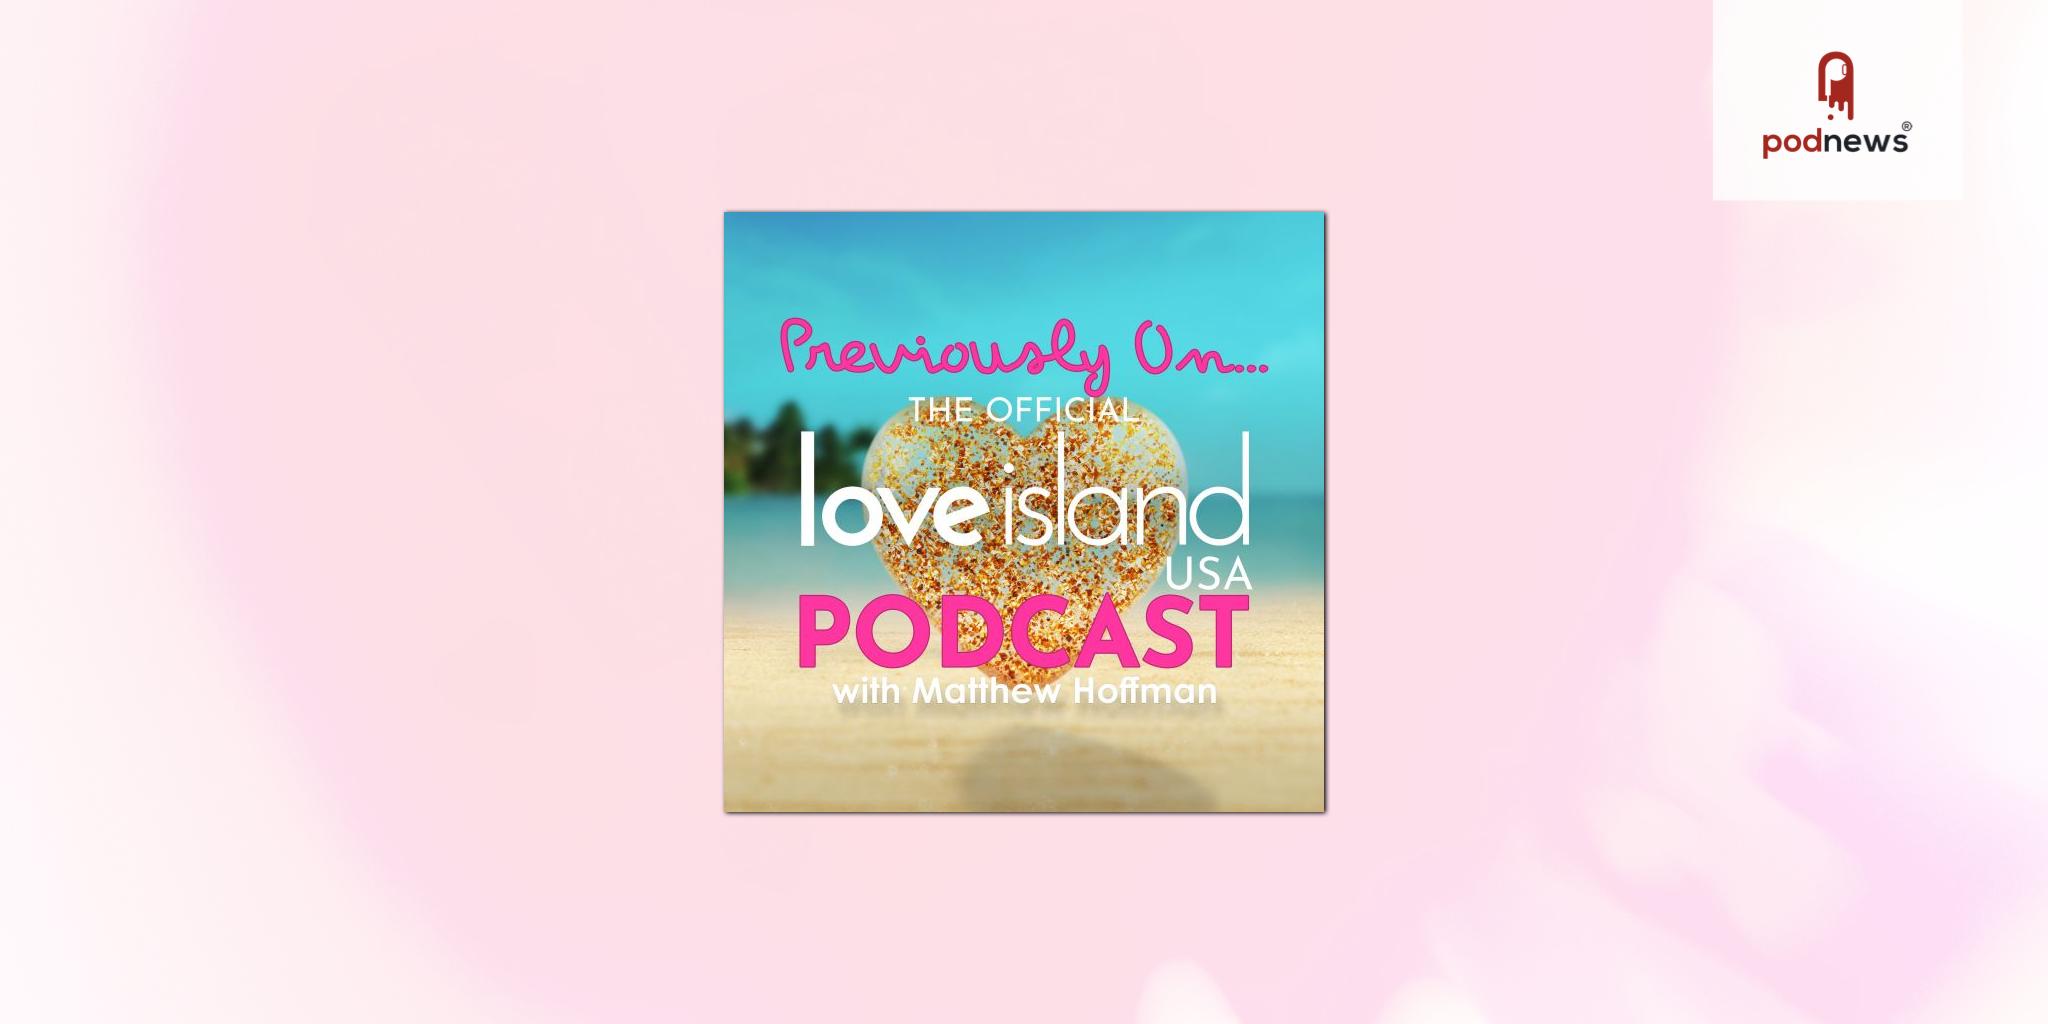 “Previously On… The Official Love Island USA Podcast with Matthew Hoffman” Launched by Hennessey Studios